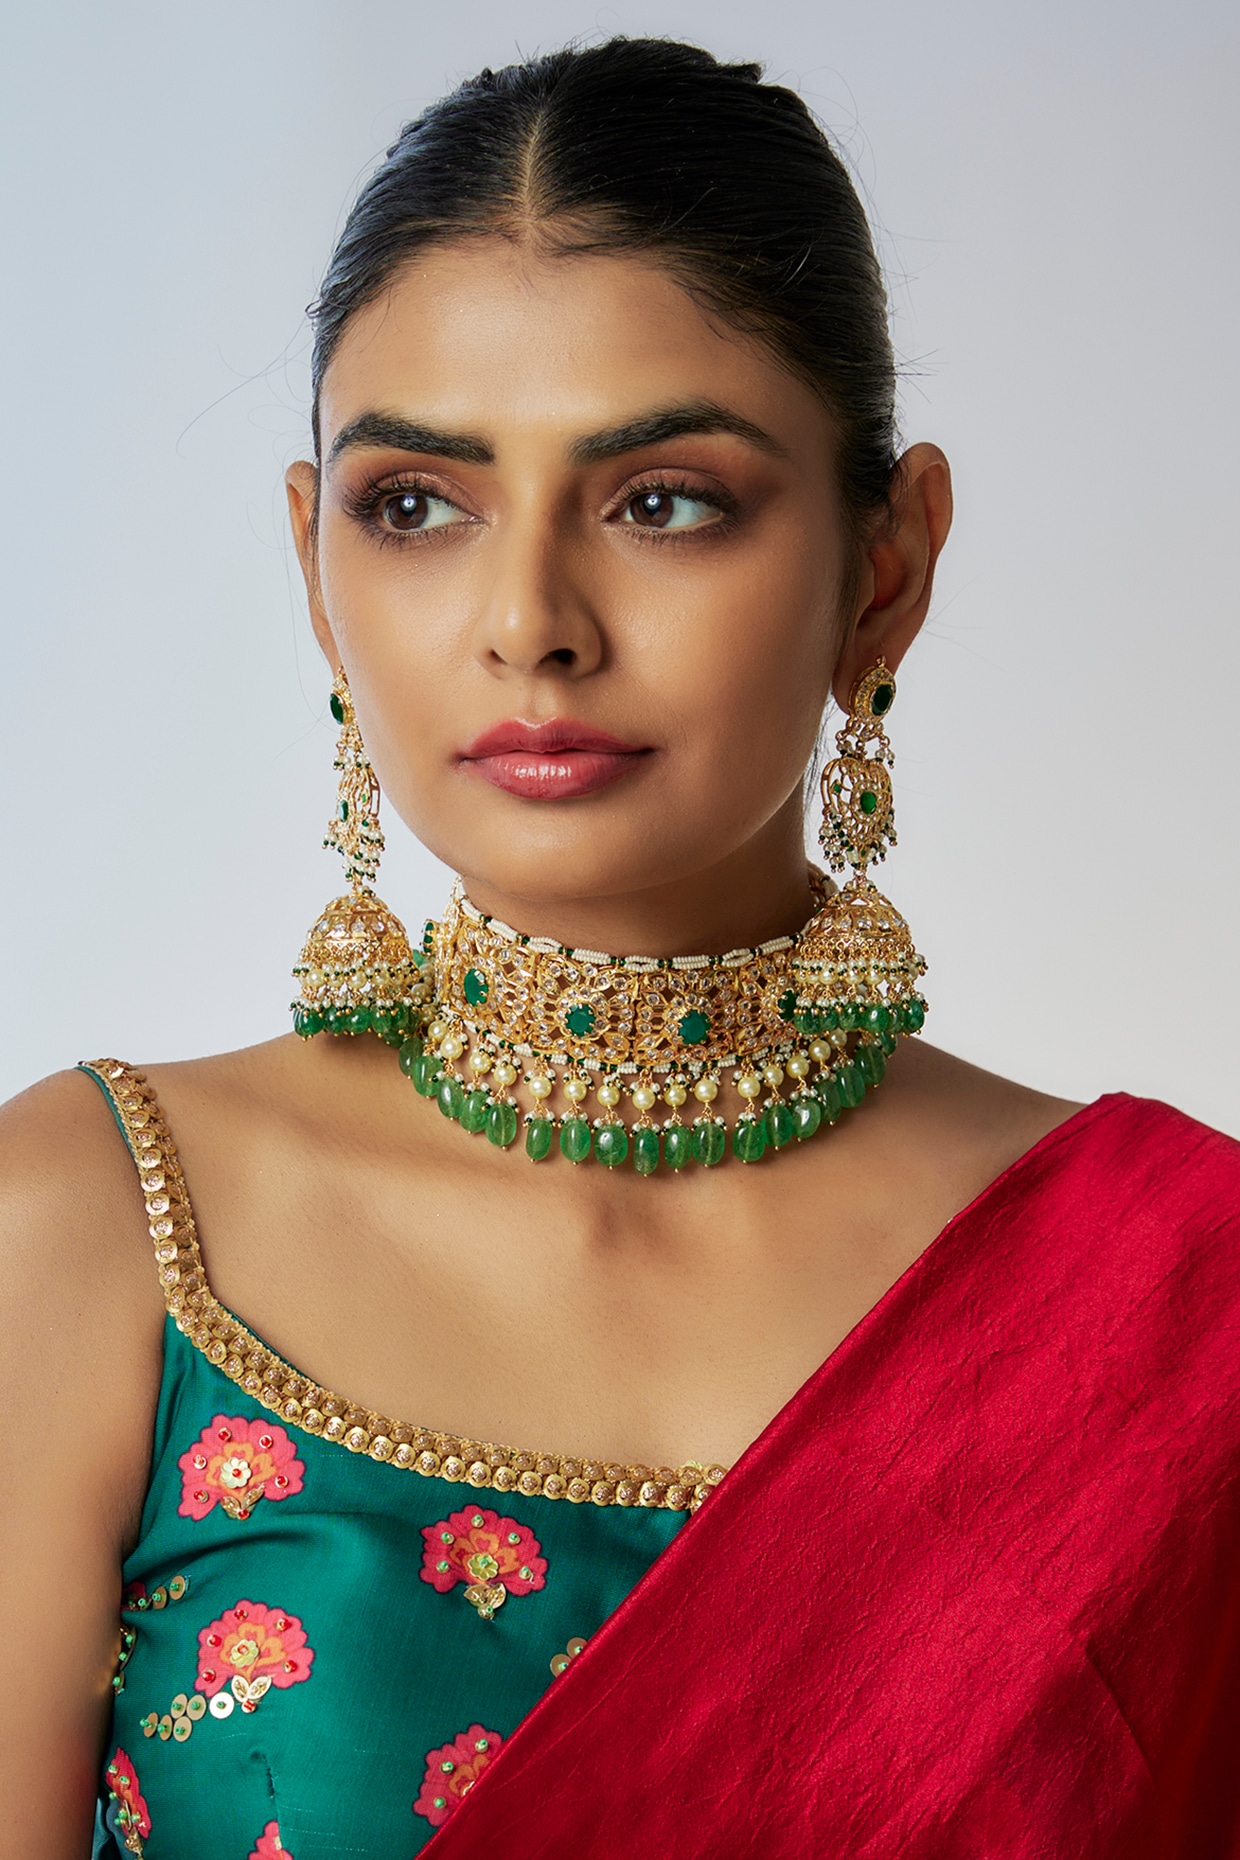 Chic Choker Necklace Designs To Pair With Sarees!! • South India Jewels |  Fashionable saree blouse designs, Saree blouse designs latest, Saree jacket  designs